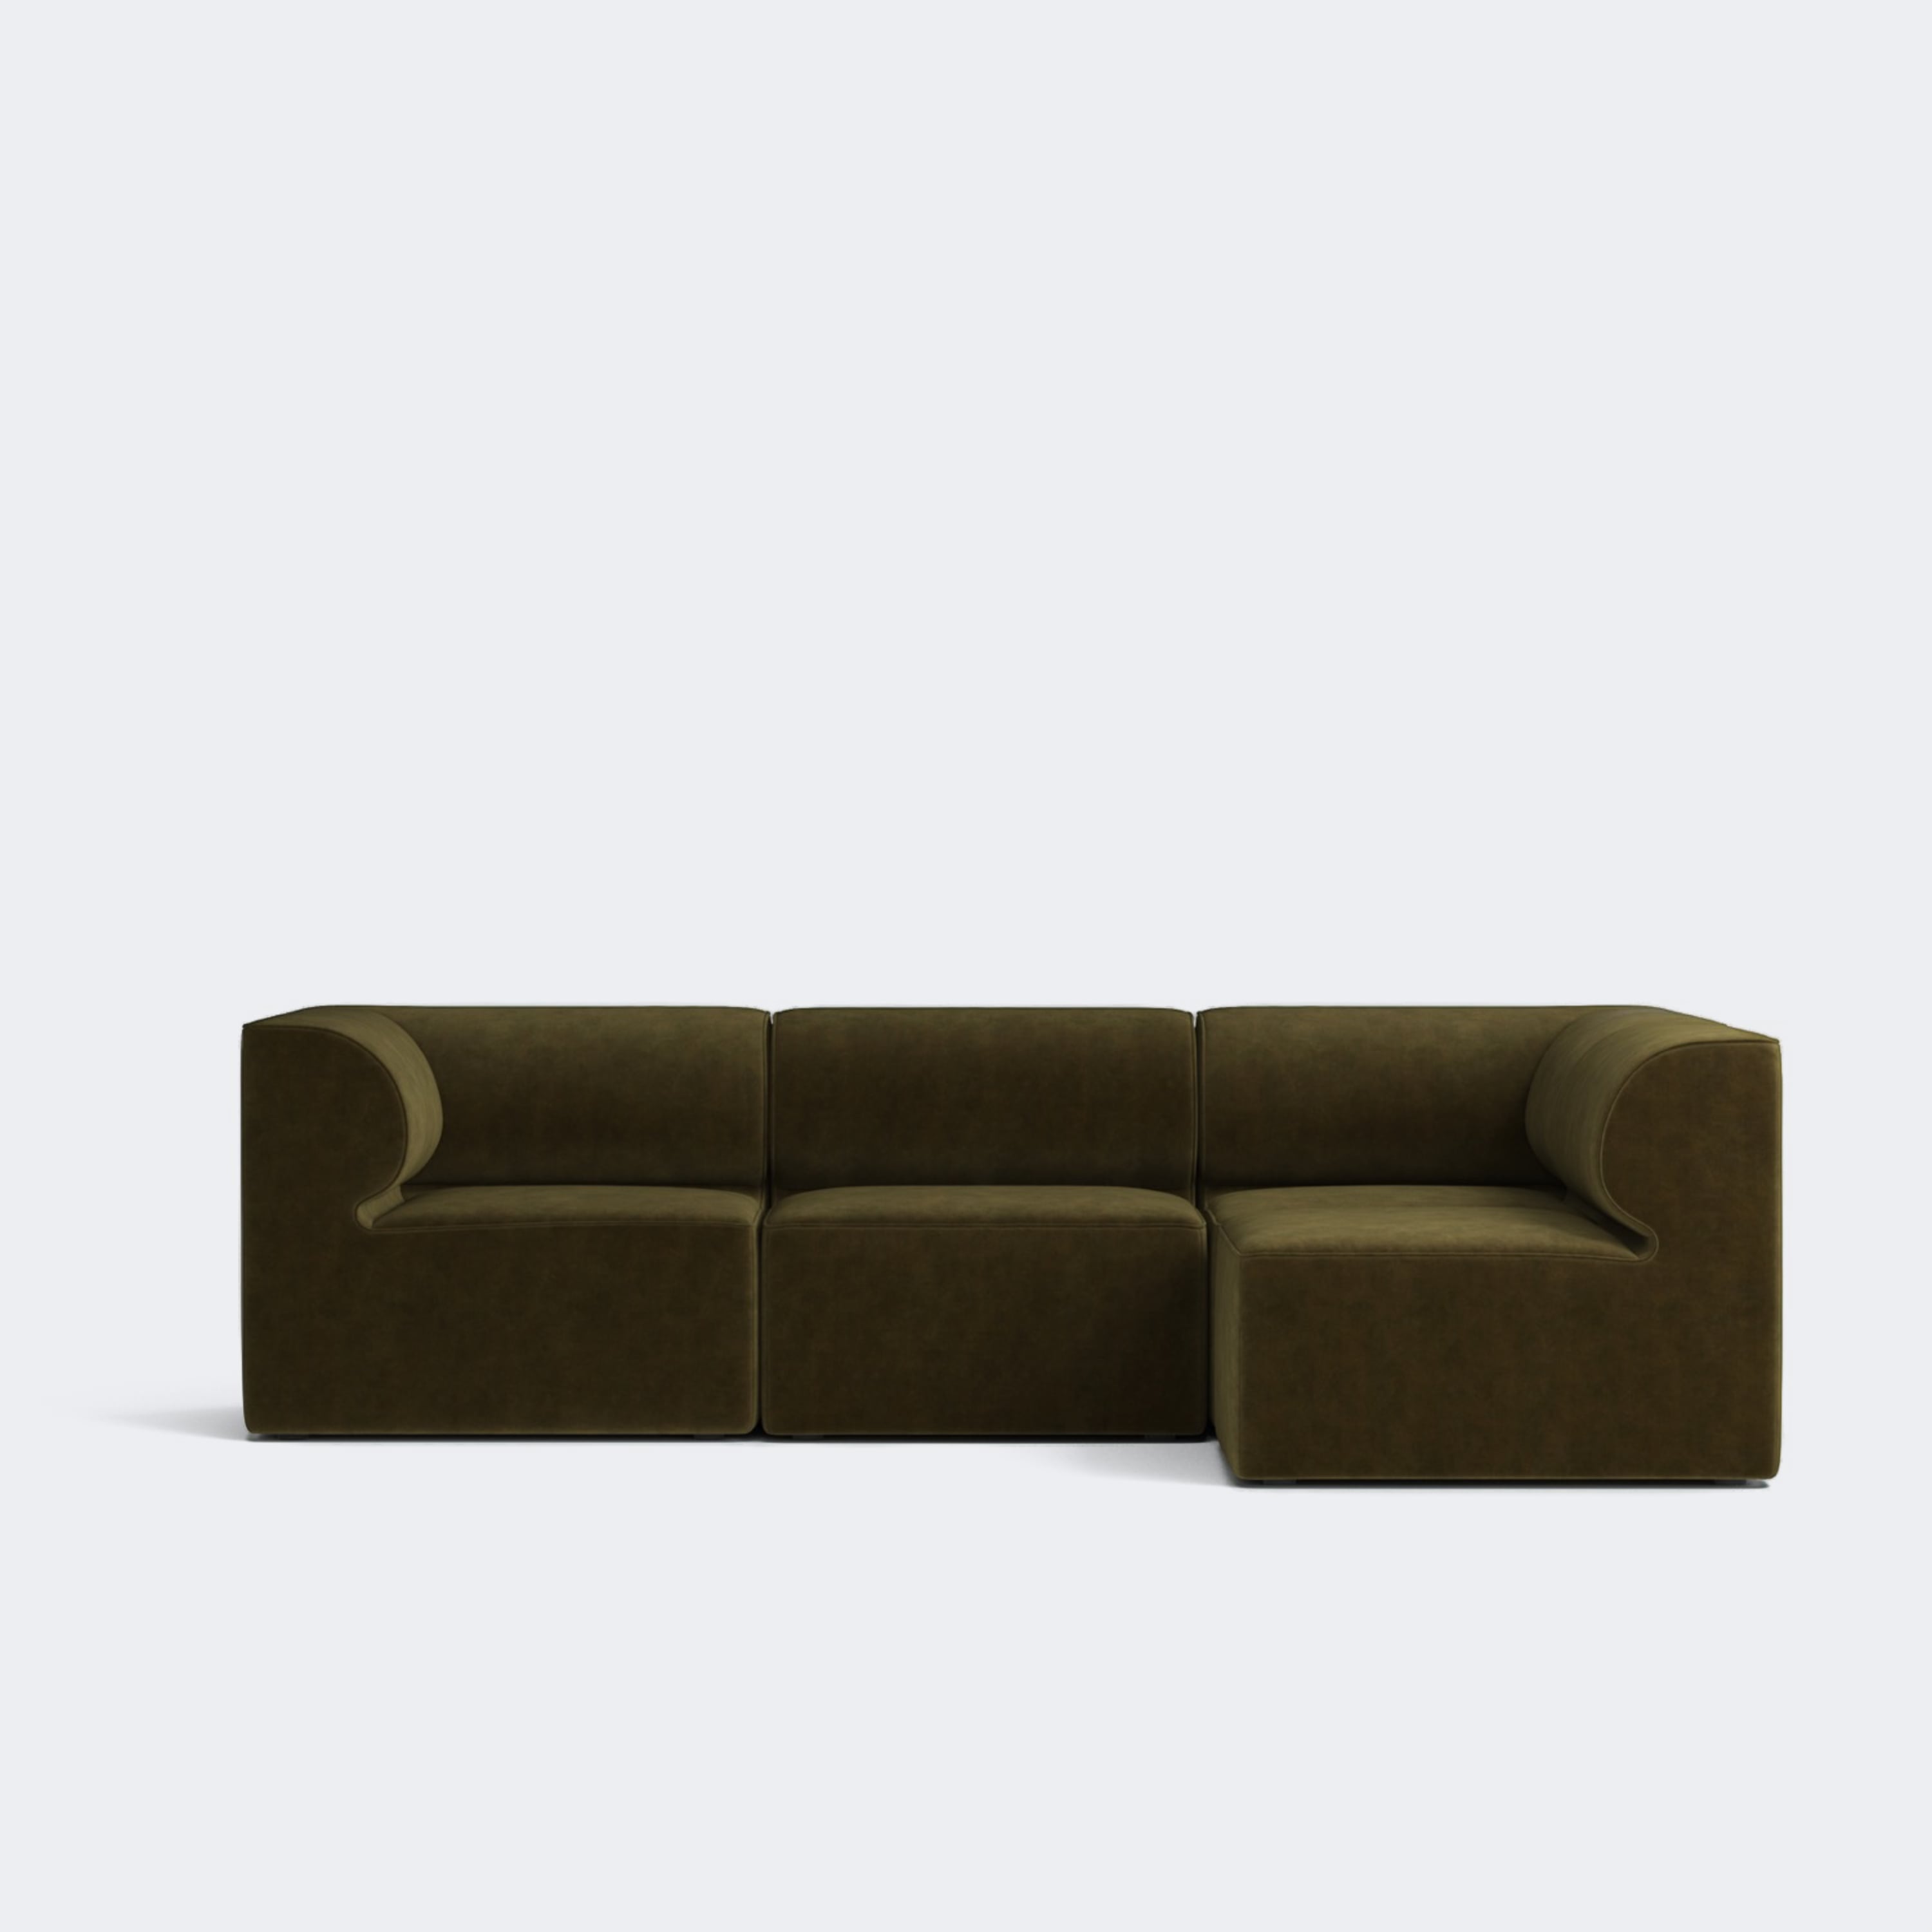 Audo Copenhagen Eave Sectional Sofa, 4-Seater Made To Order (10-12 Weeks) 4-Seater | Right Section Champion #035 - KANSO